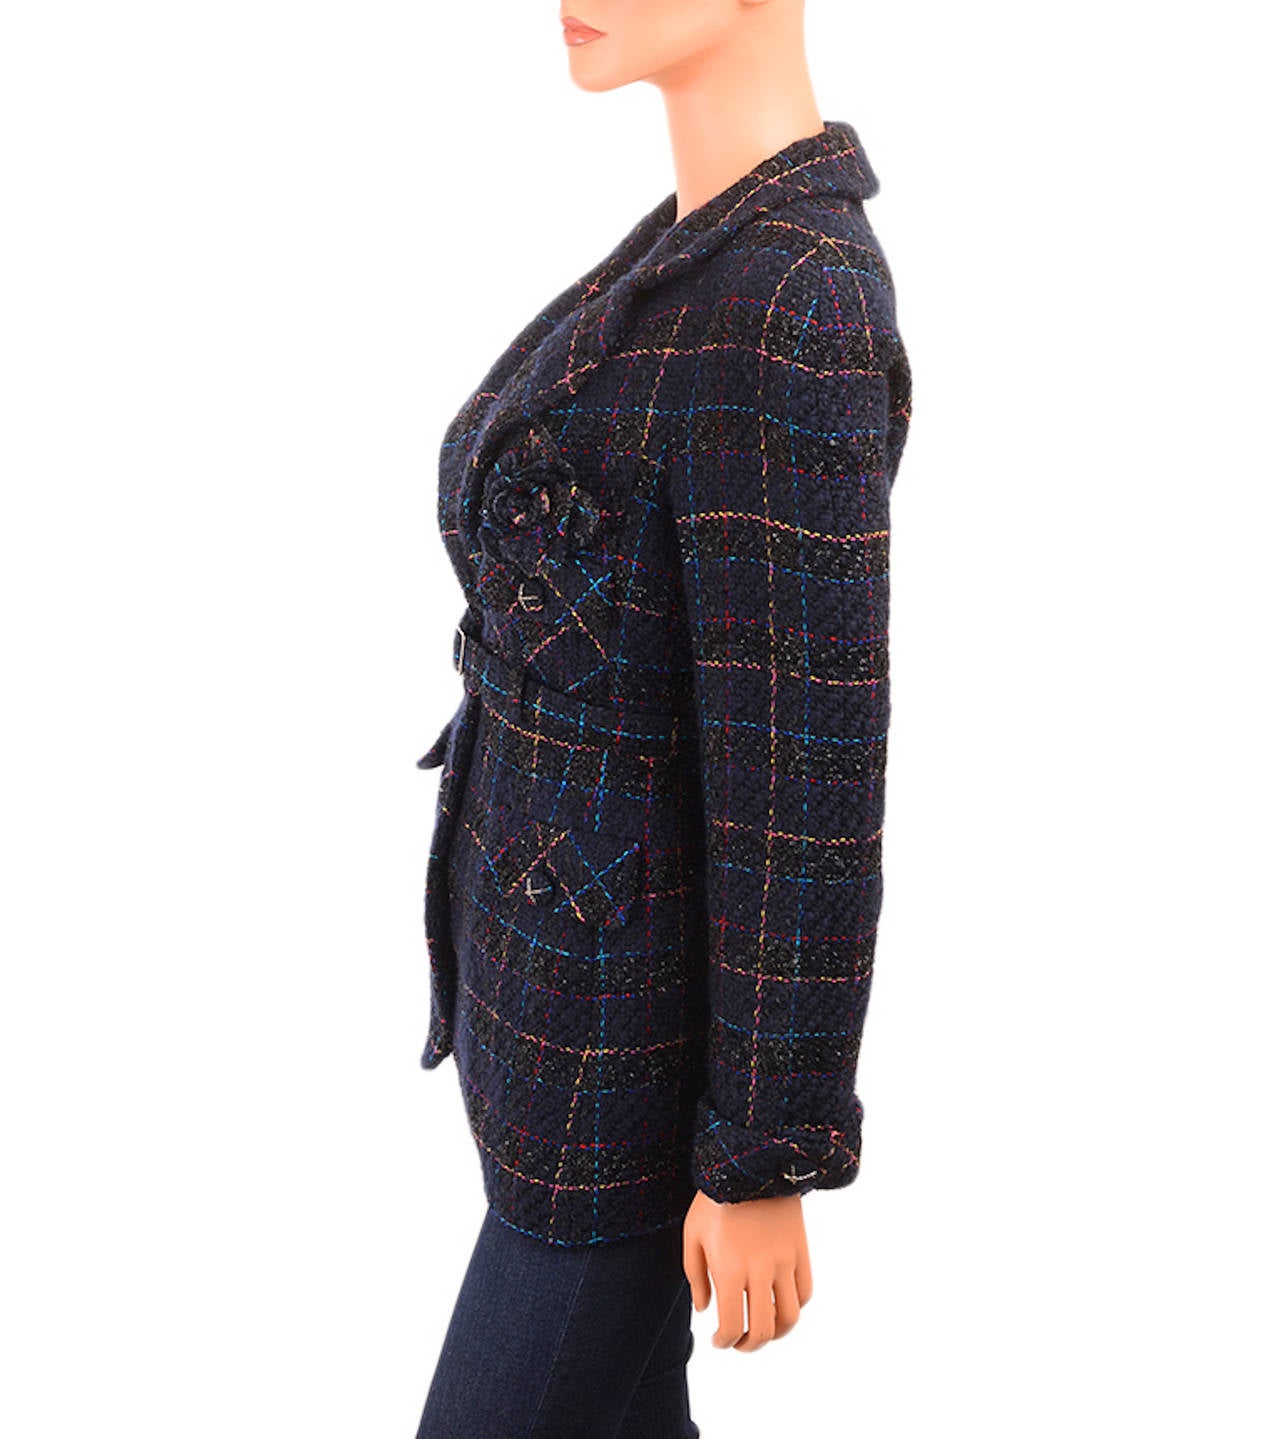 Chanel 07A Navy Black Multicolor Belted Plaid Boucle Jacket 42 10 In Excellent Condition For Sale In New York, NY